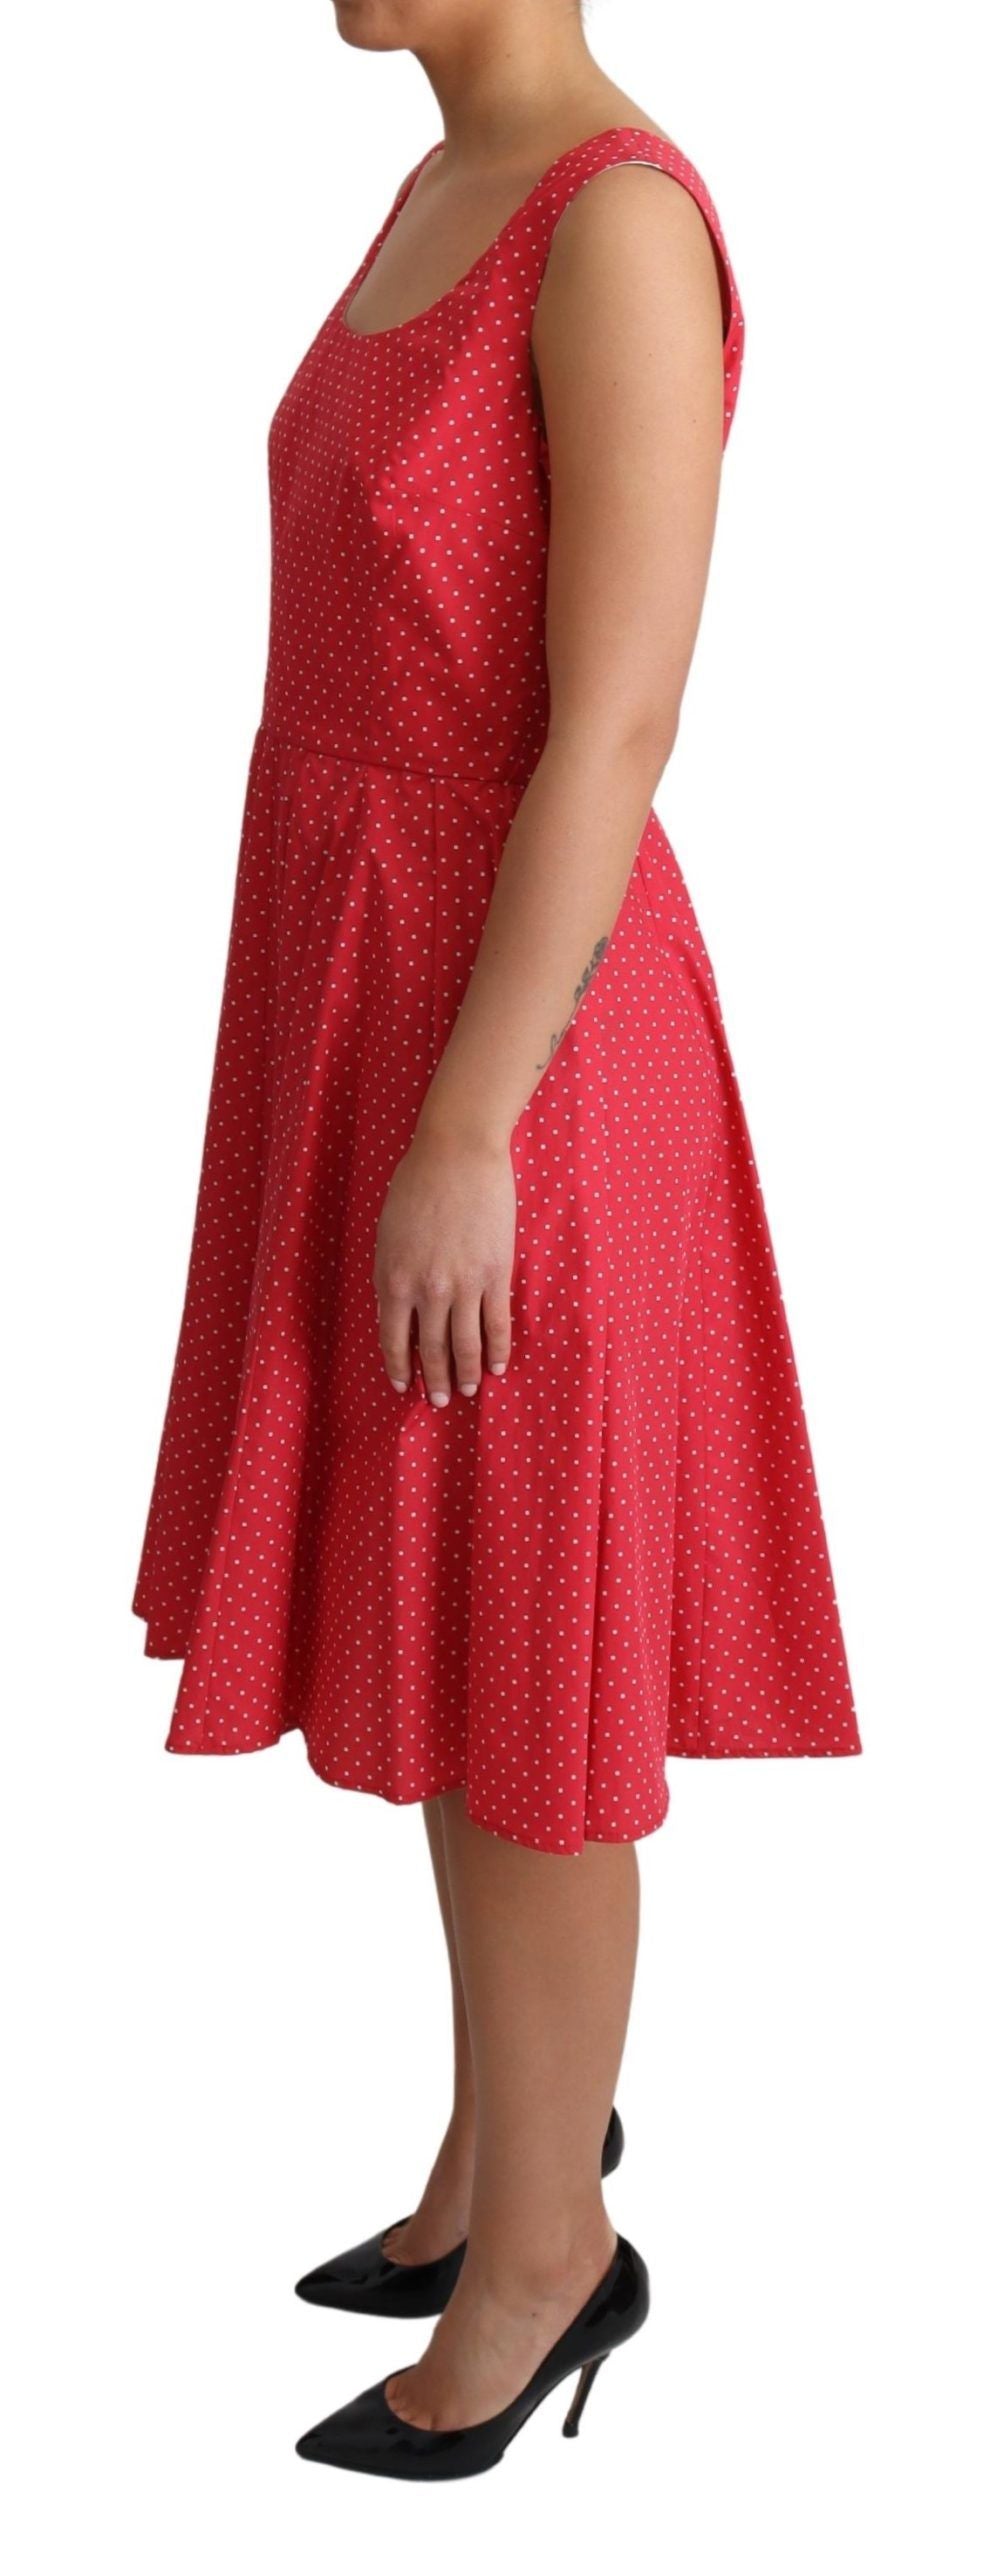 Dolce & Gabbana Red Polka Dotted Cotton A-Line Dress